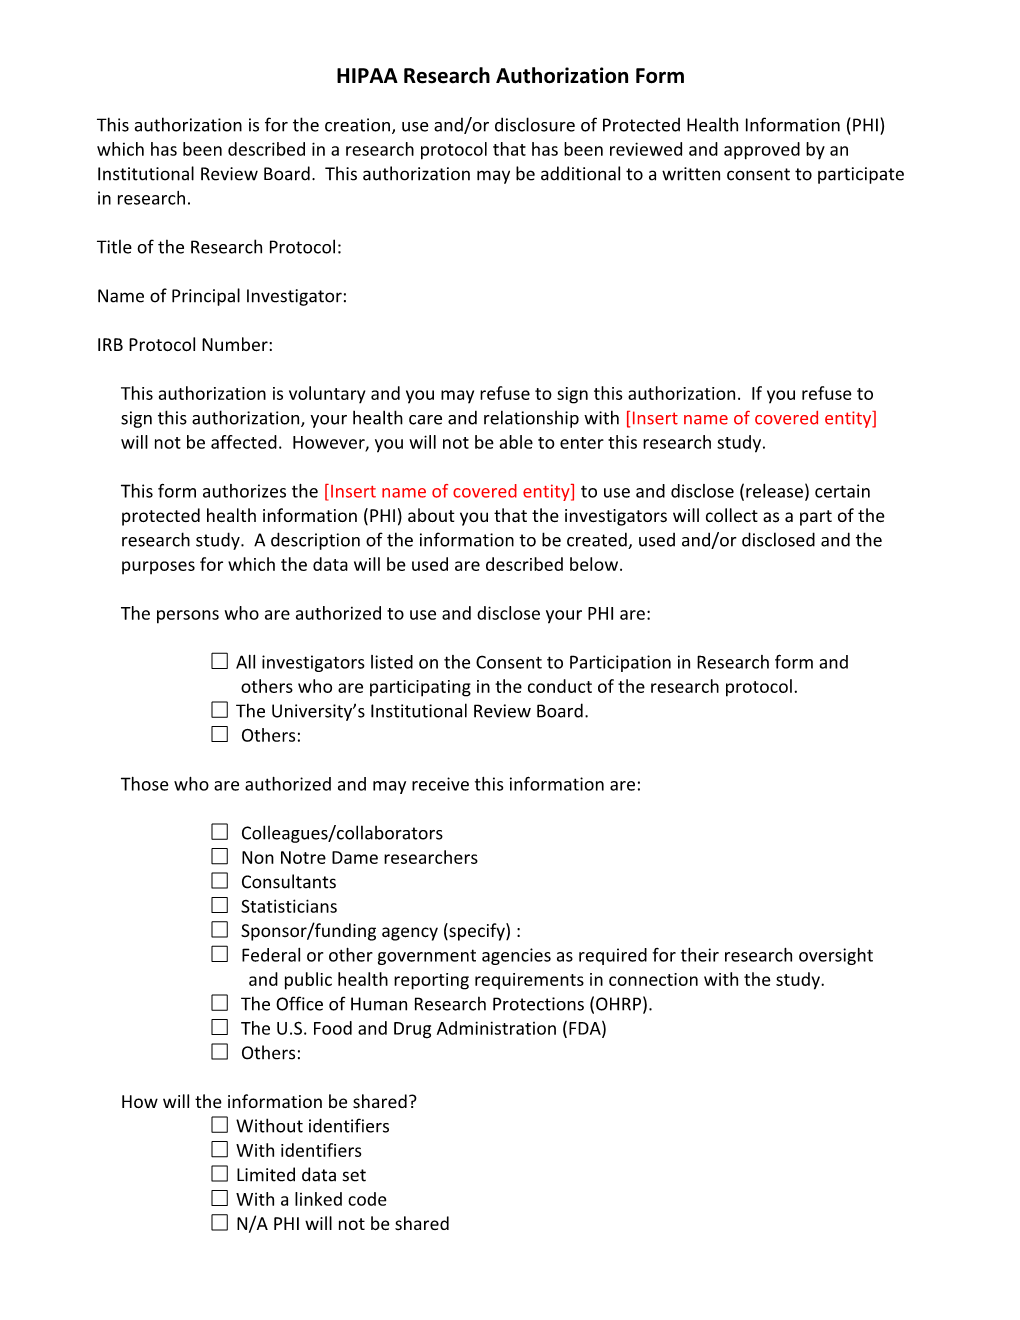 Consent Cover Letter For Survey Research